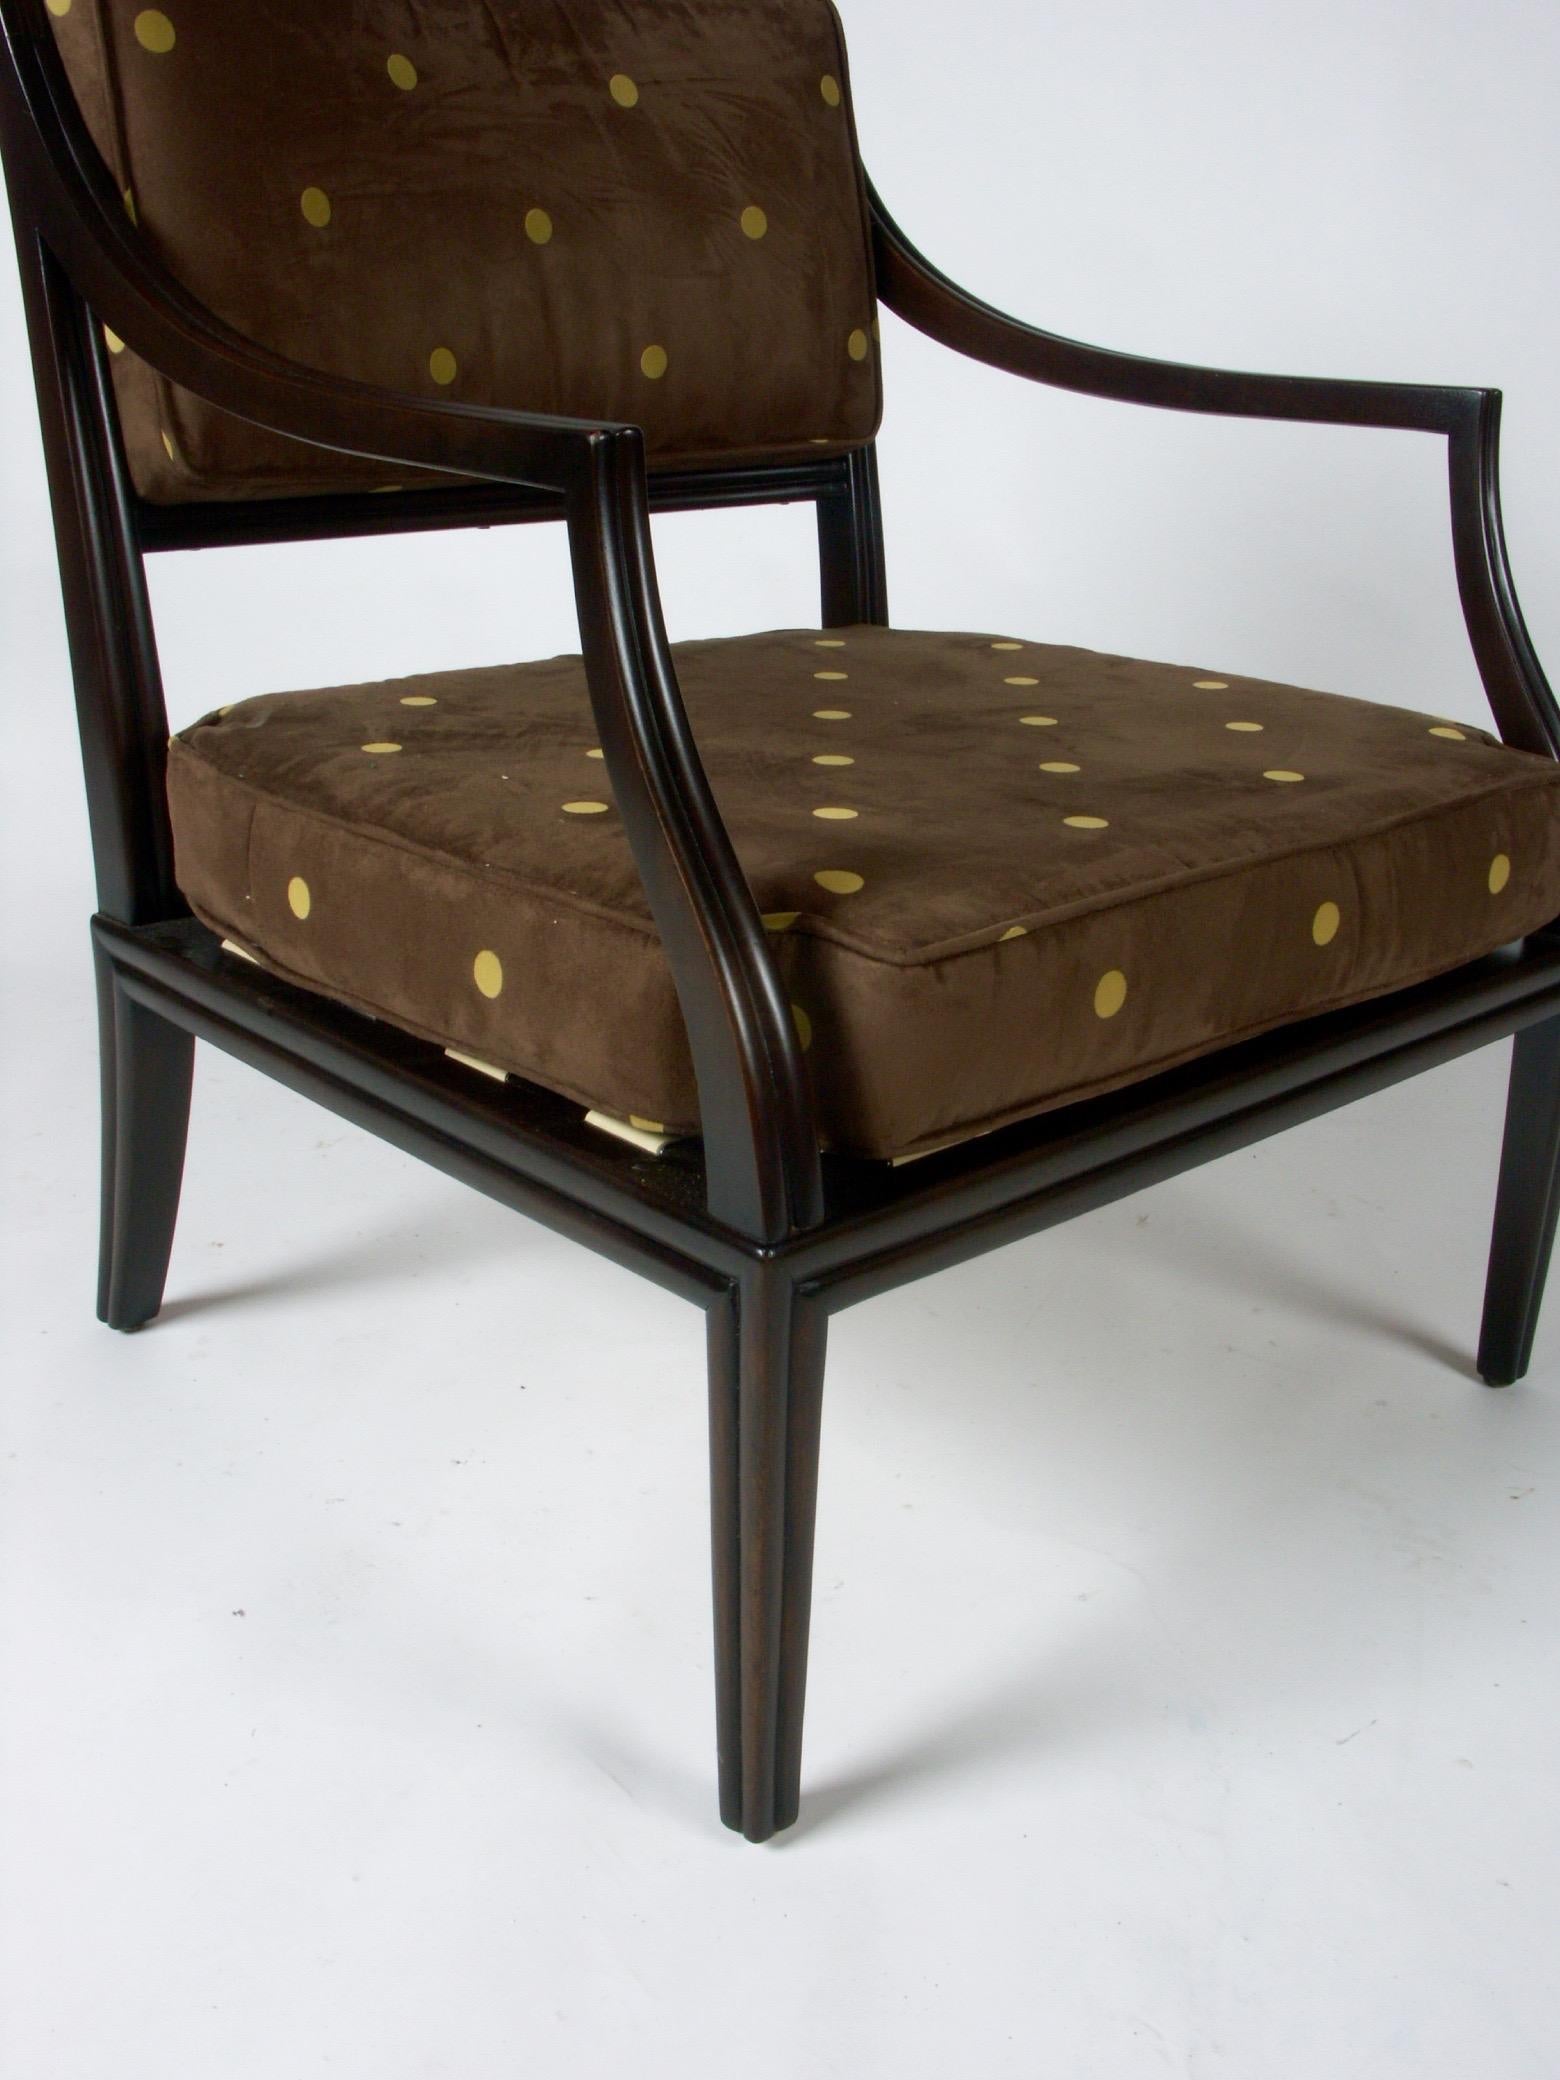 Rare and Elegant Edward Wormley for Dunbar Lounge Armchair In Excellent Condition For Sale In St. Louis, MO